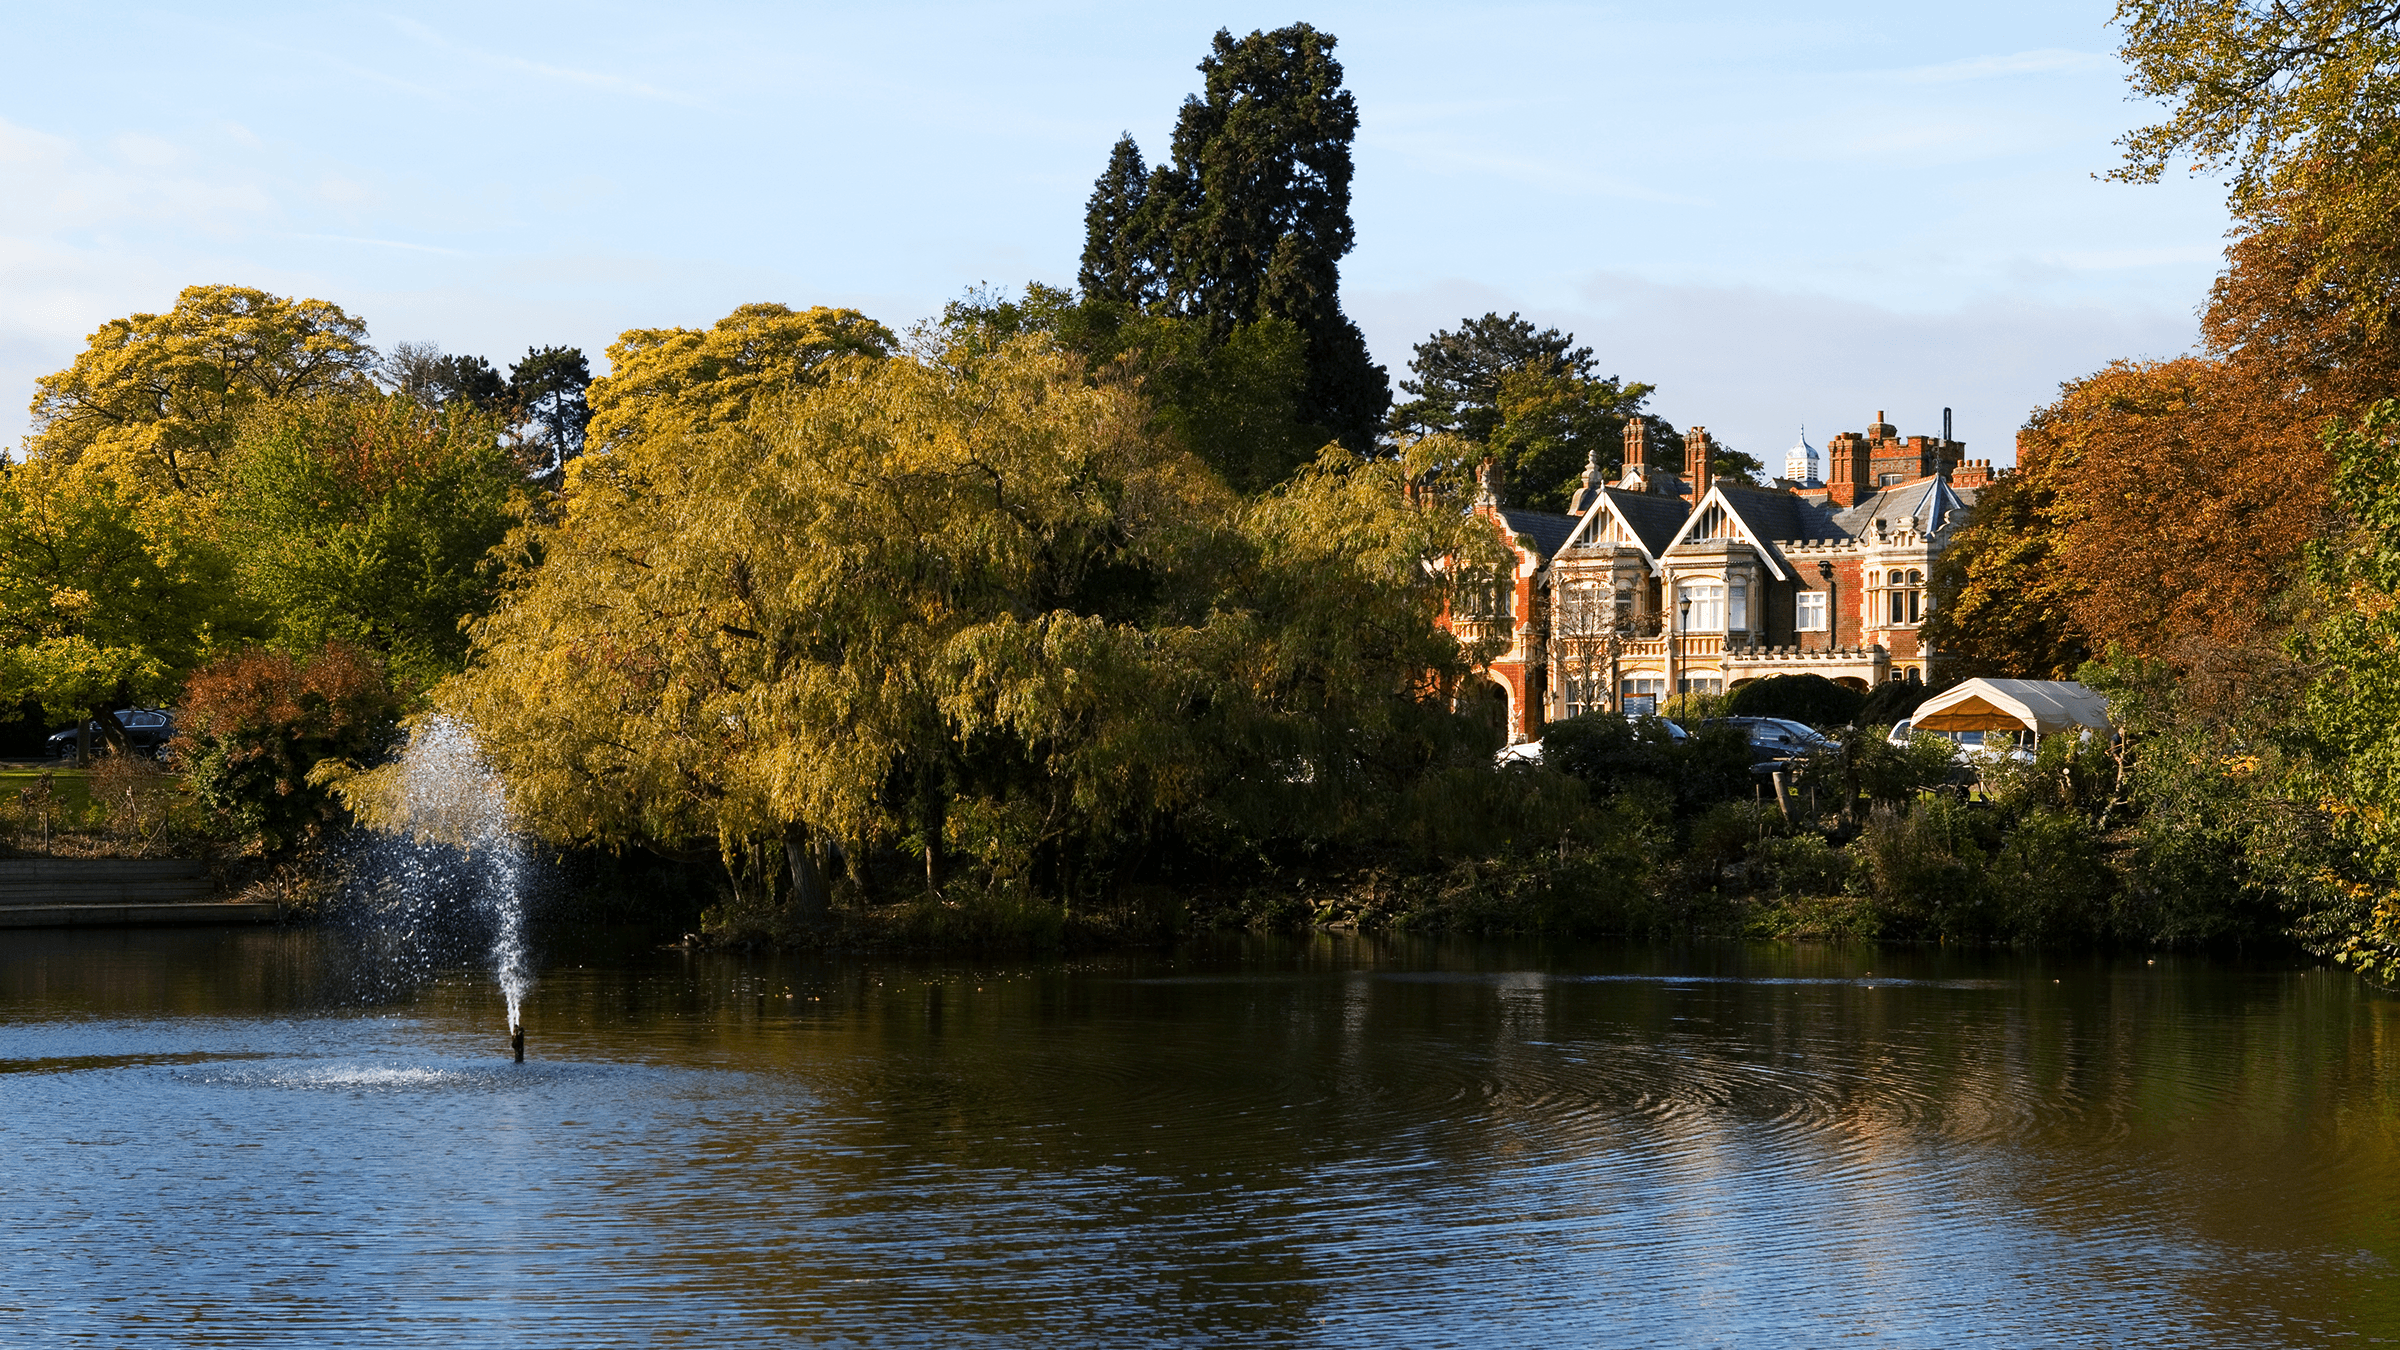 an image taken of Bletchley Park from across the great lake in the foreground.